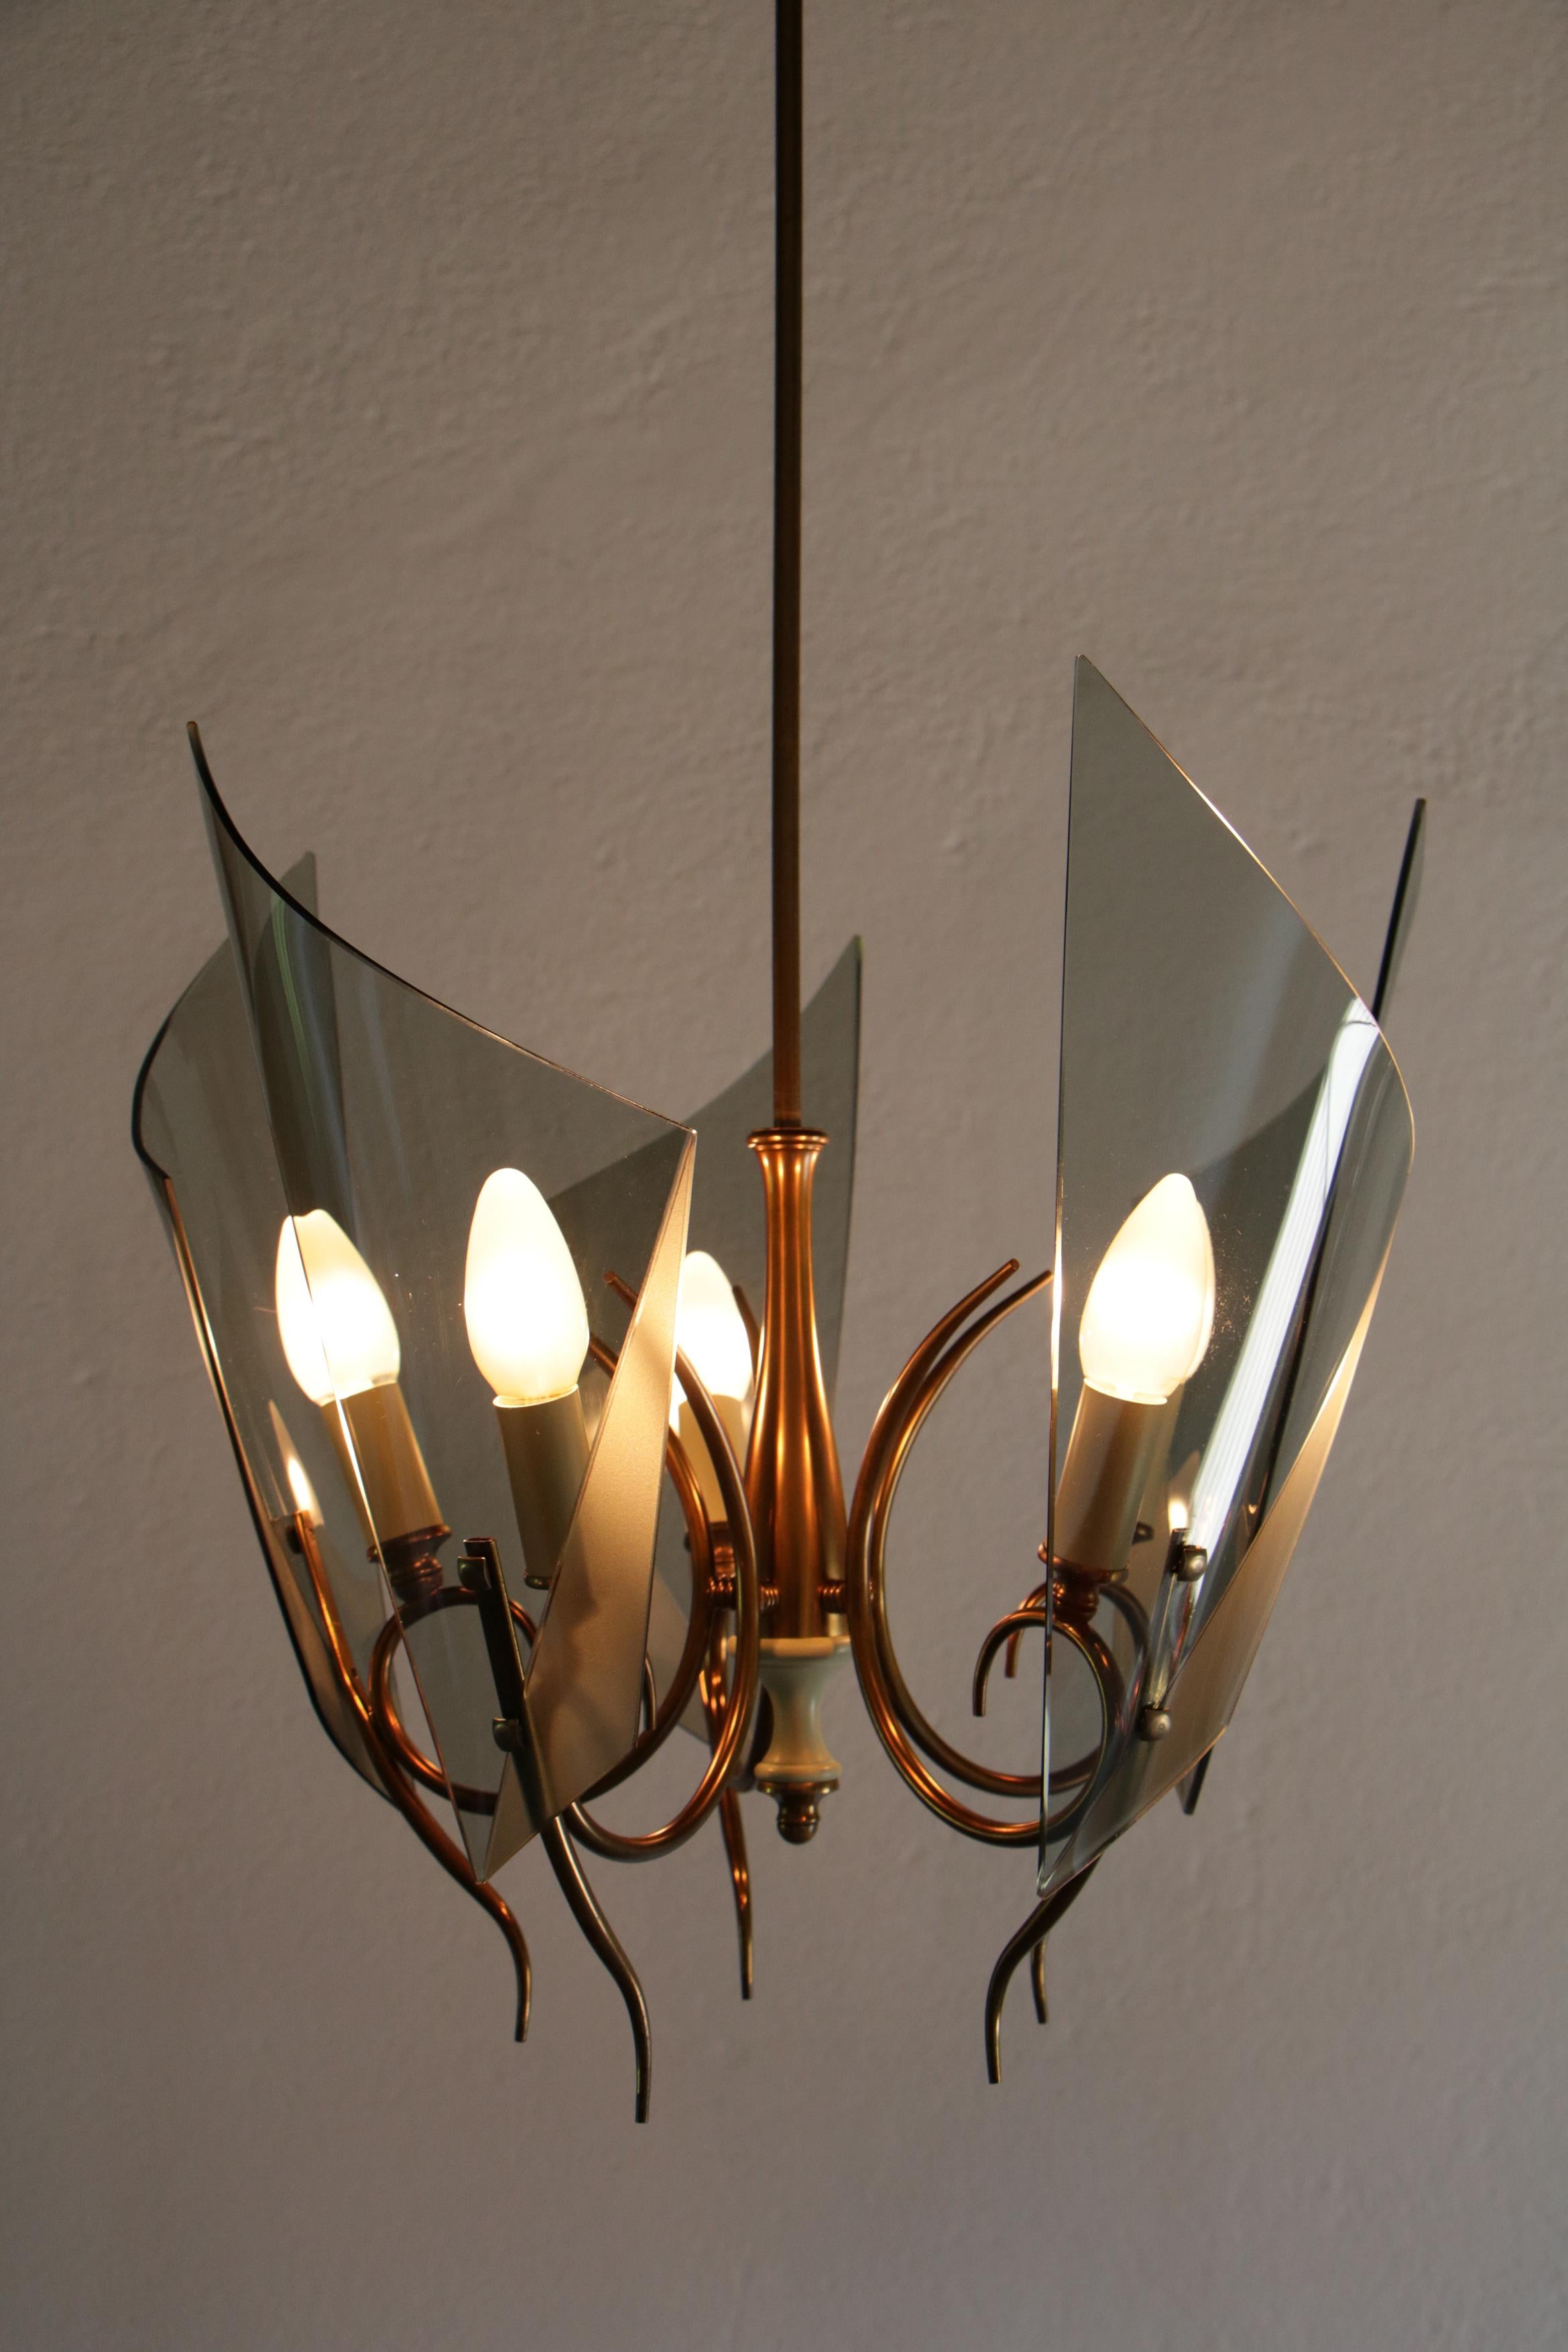 Italian Mid-Century Curved Glass Chandelier Attributed to Fontana Arte, 1950s For Sale 9